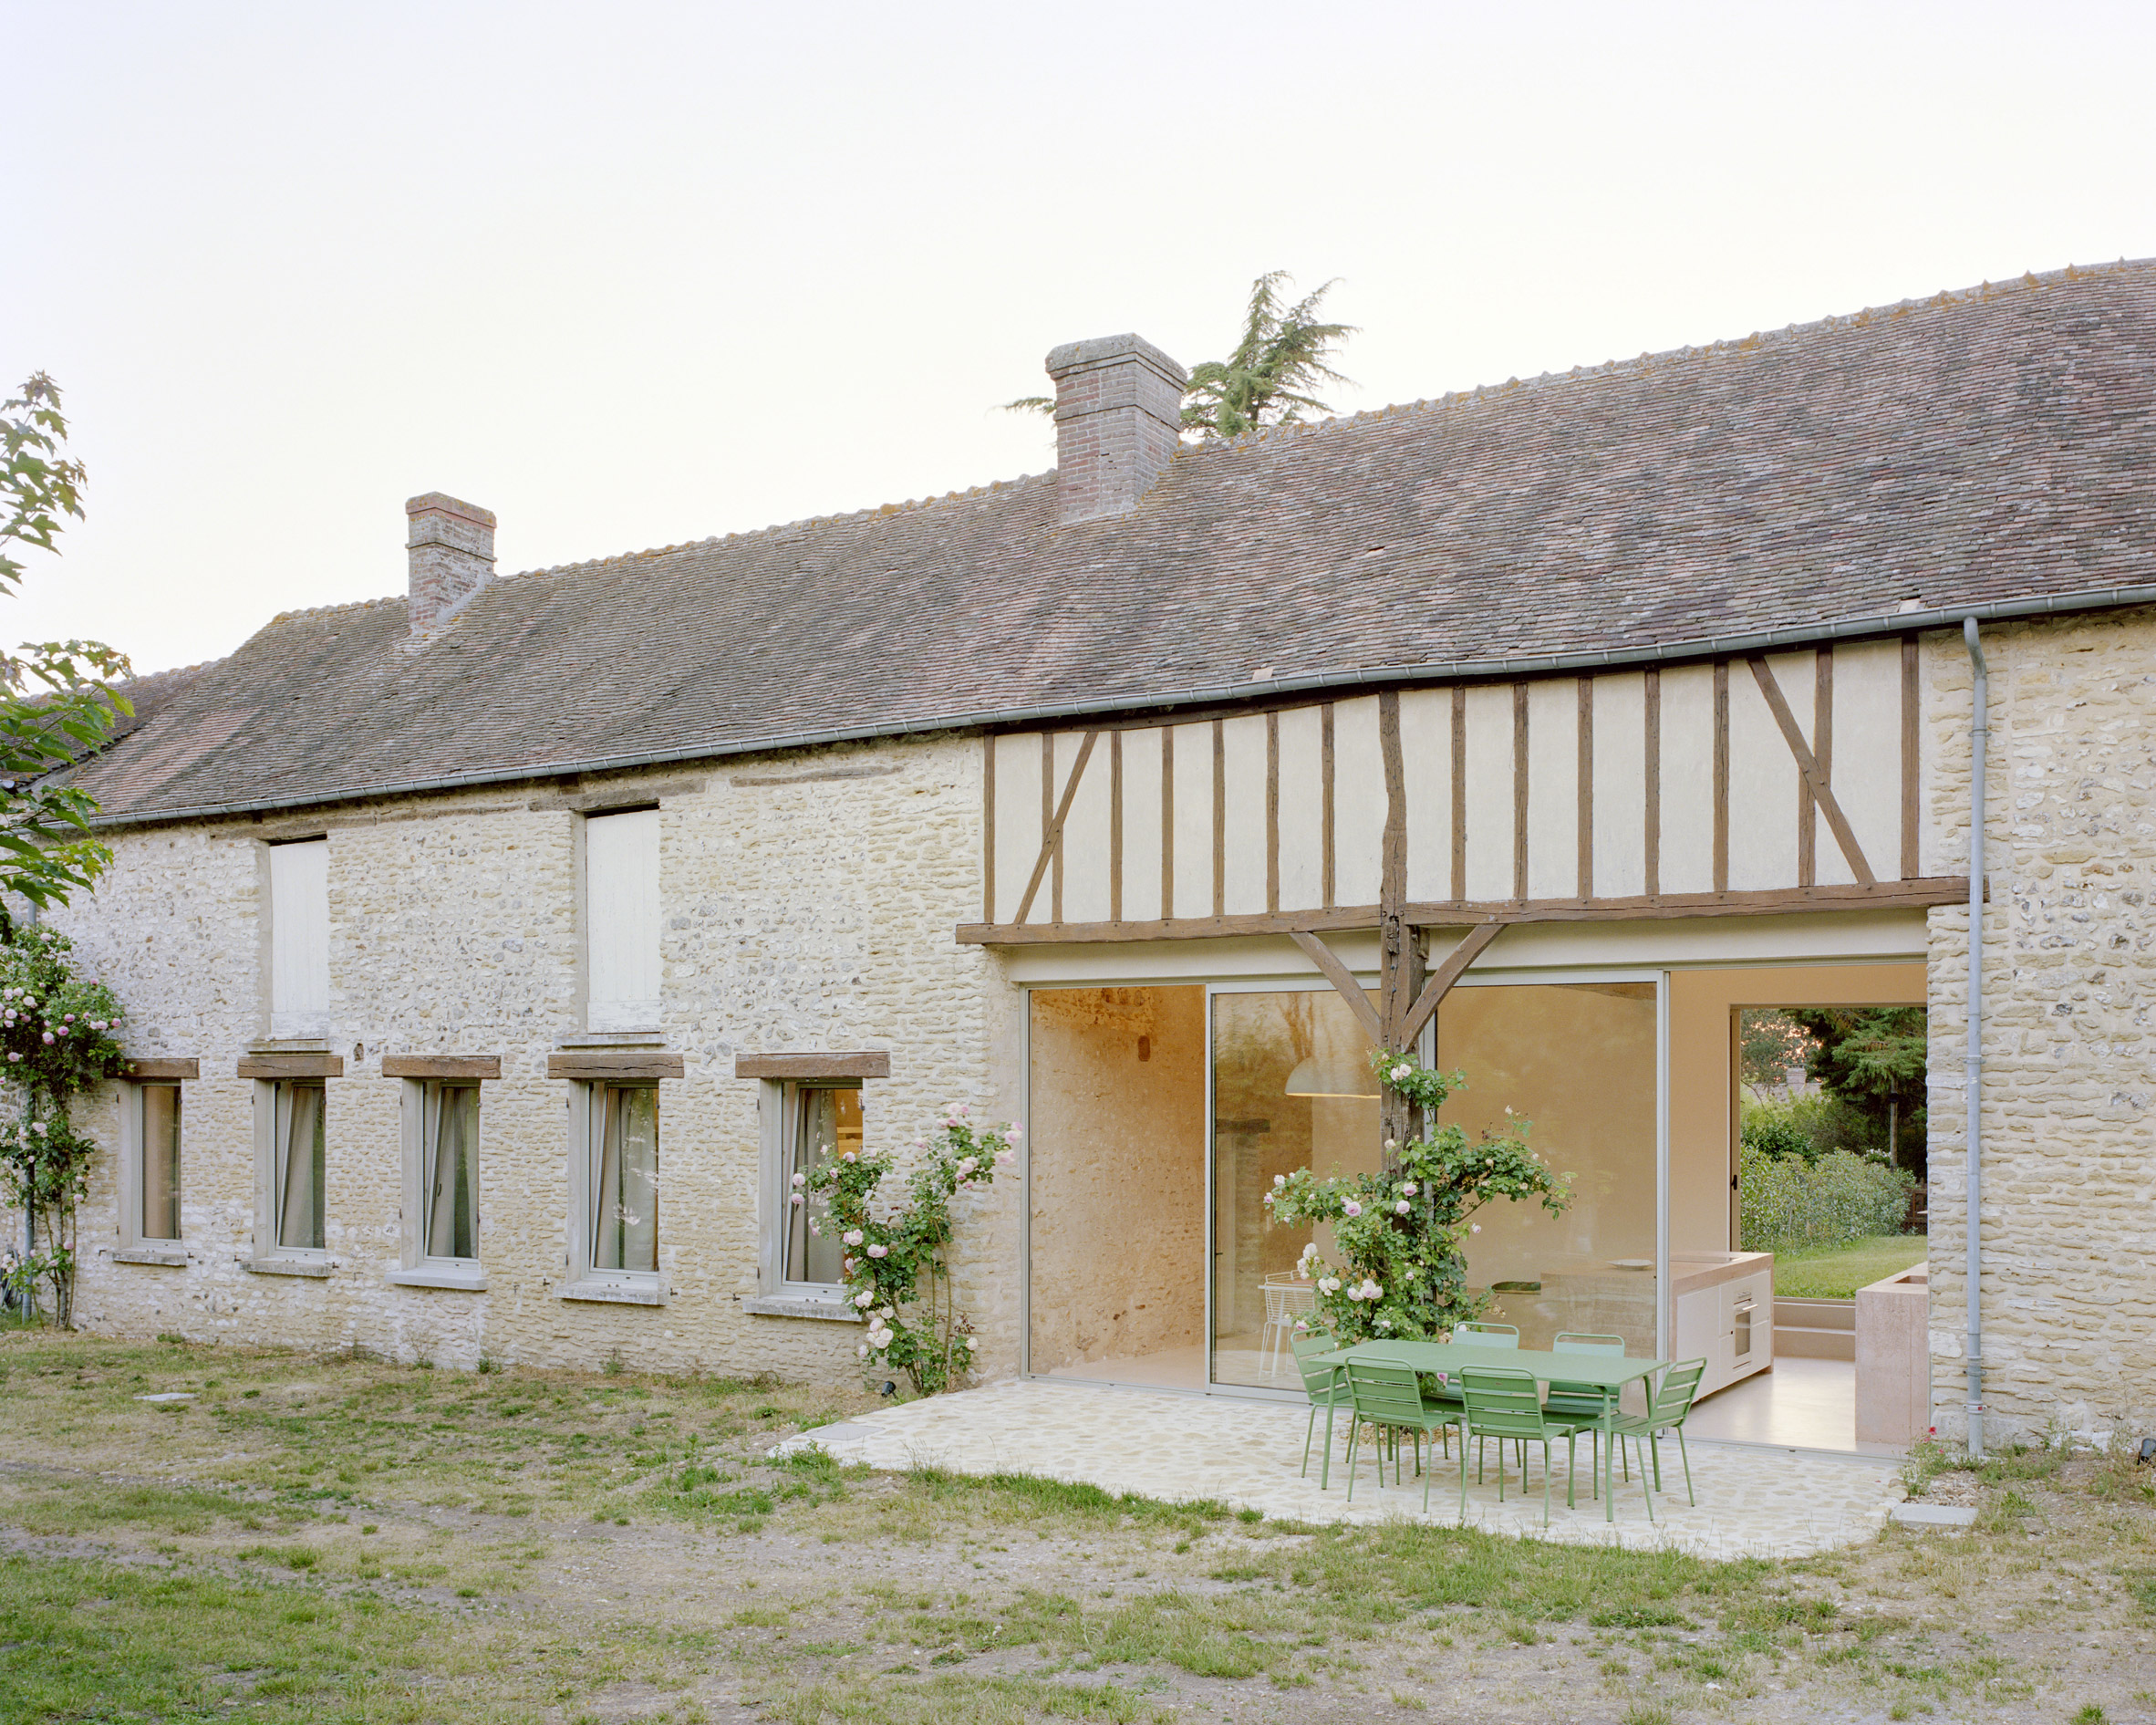 Exterior patio with stone paving at Maison Hercourt by Studio Guma in Normandy